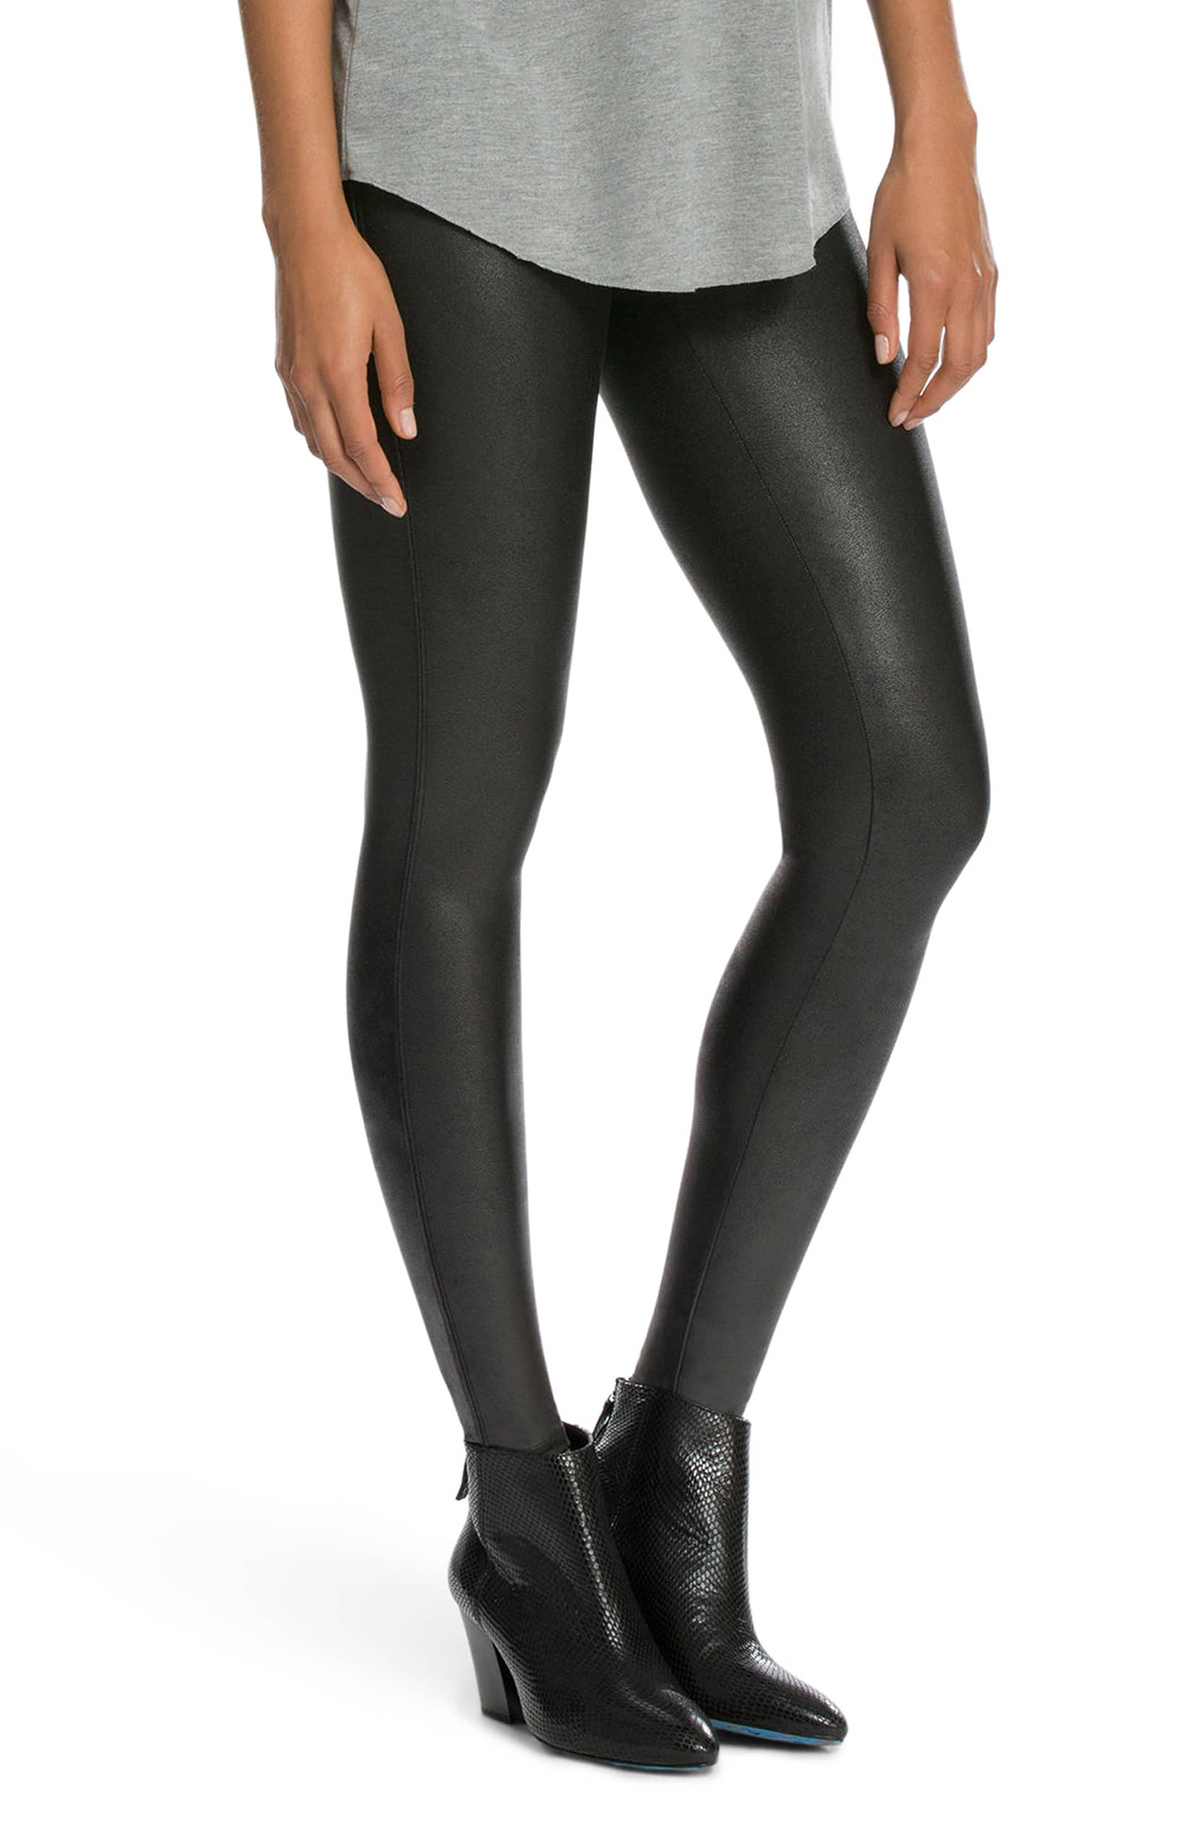 11 Of The Absolute Best Black Leggings For Every Body Type Carmon Report